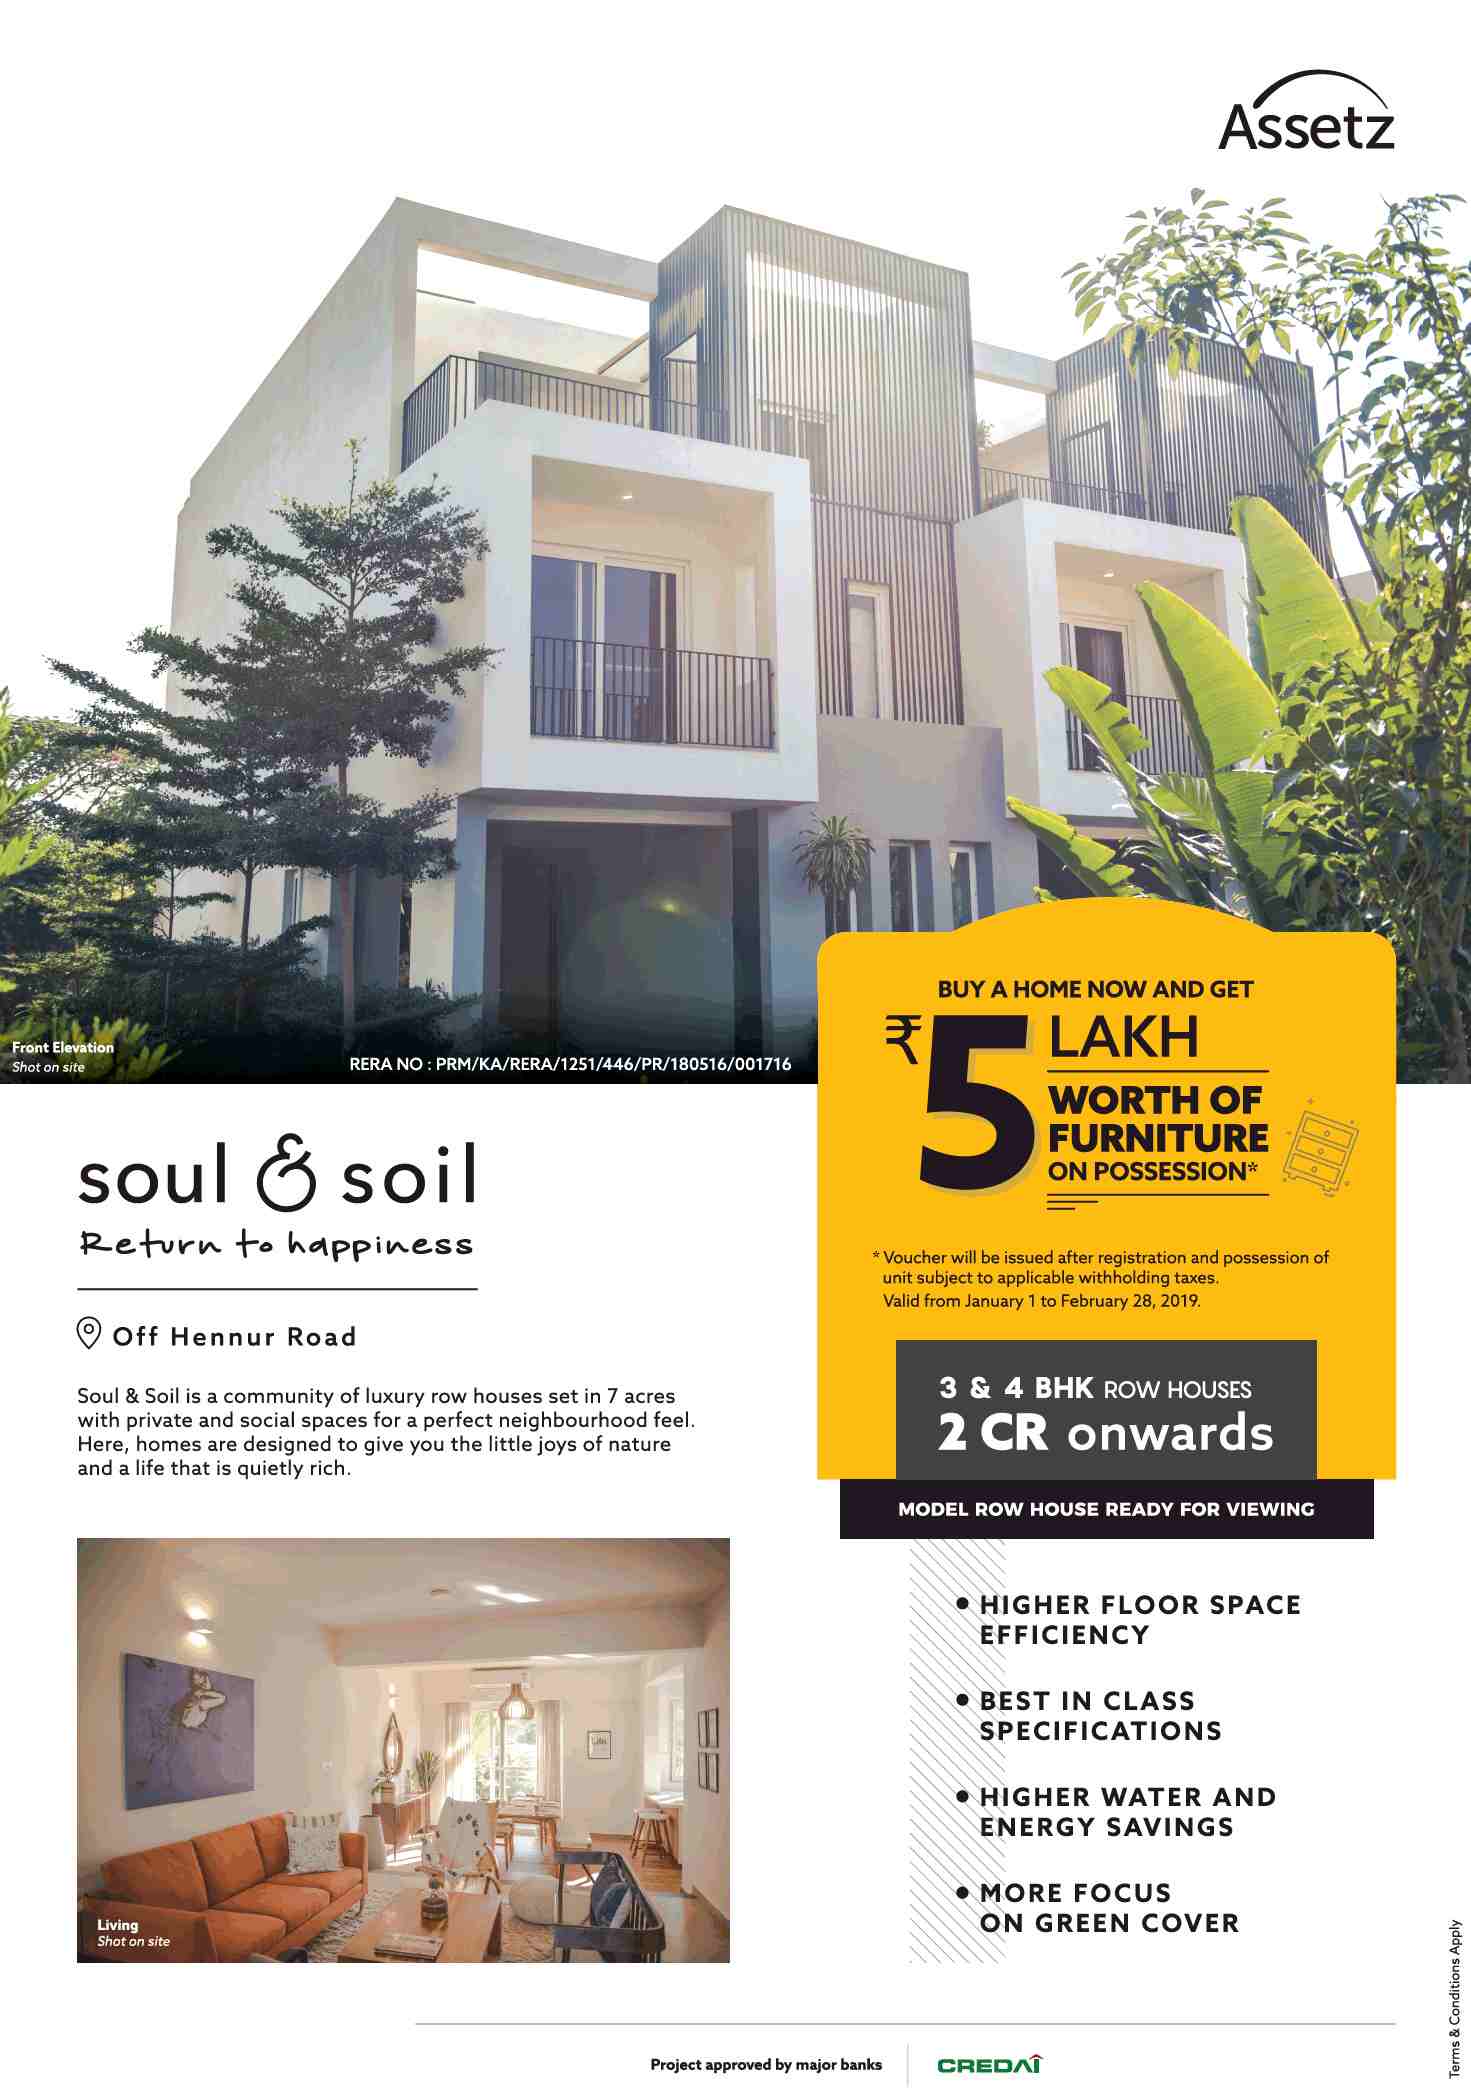 Buy a home now & get Rs 5 Lakh worth of furniture on possession at Assetz Soul & Soil in Bangalore